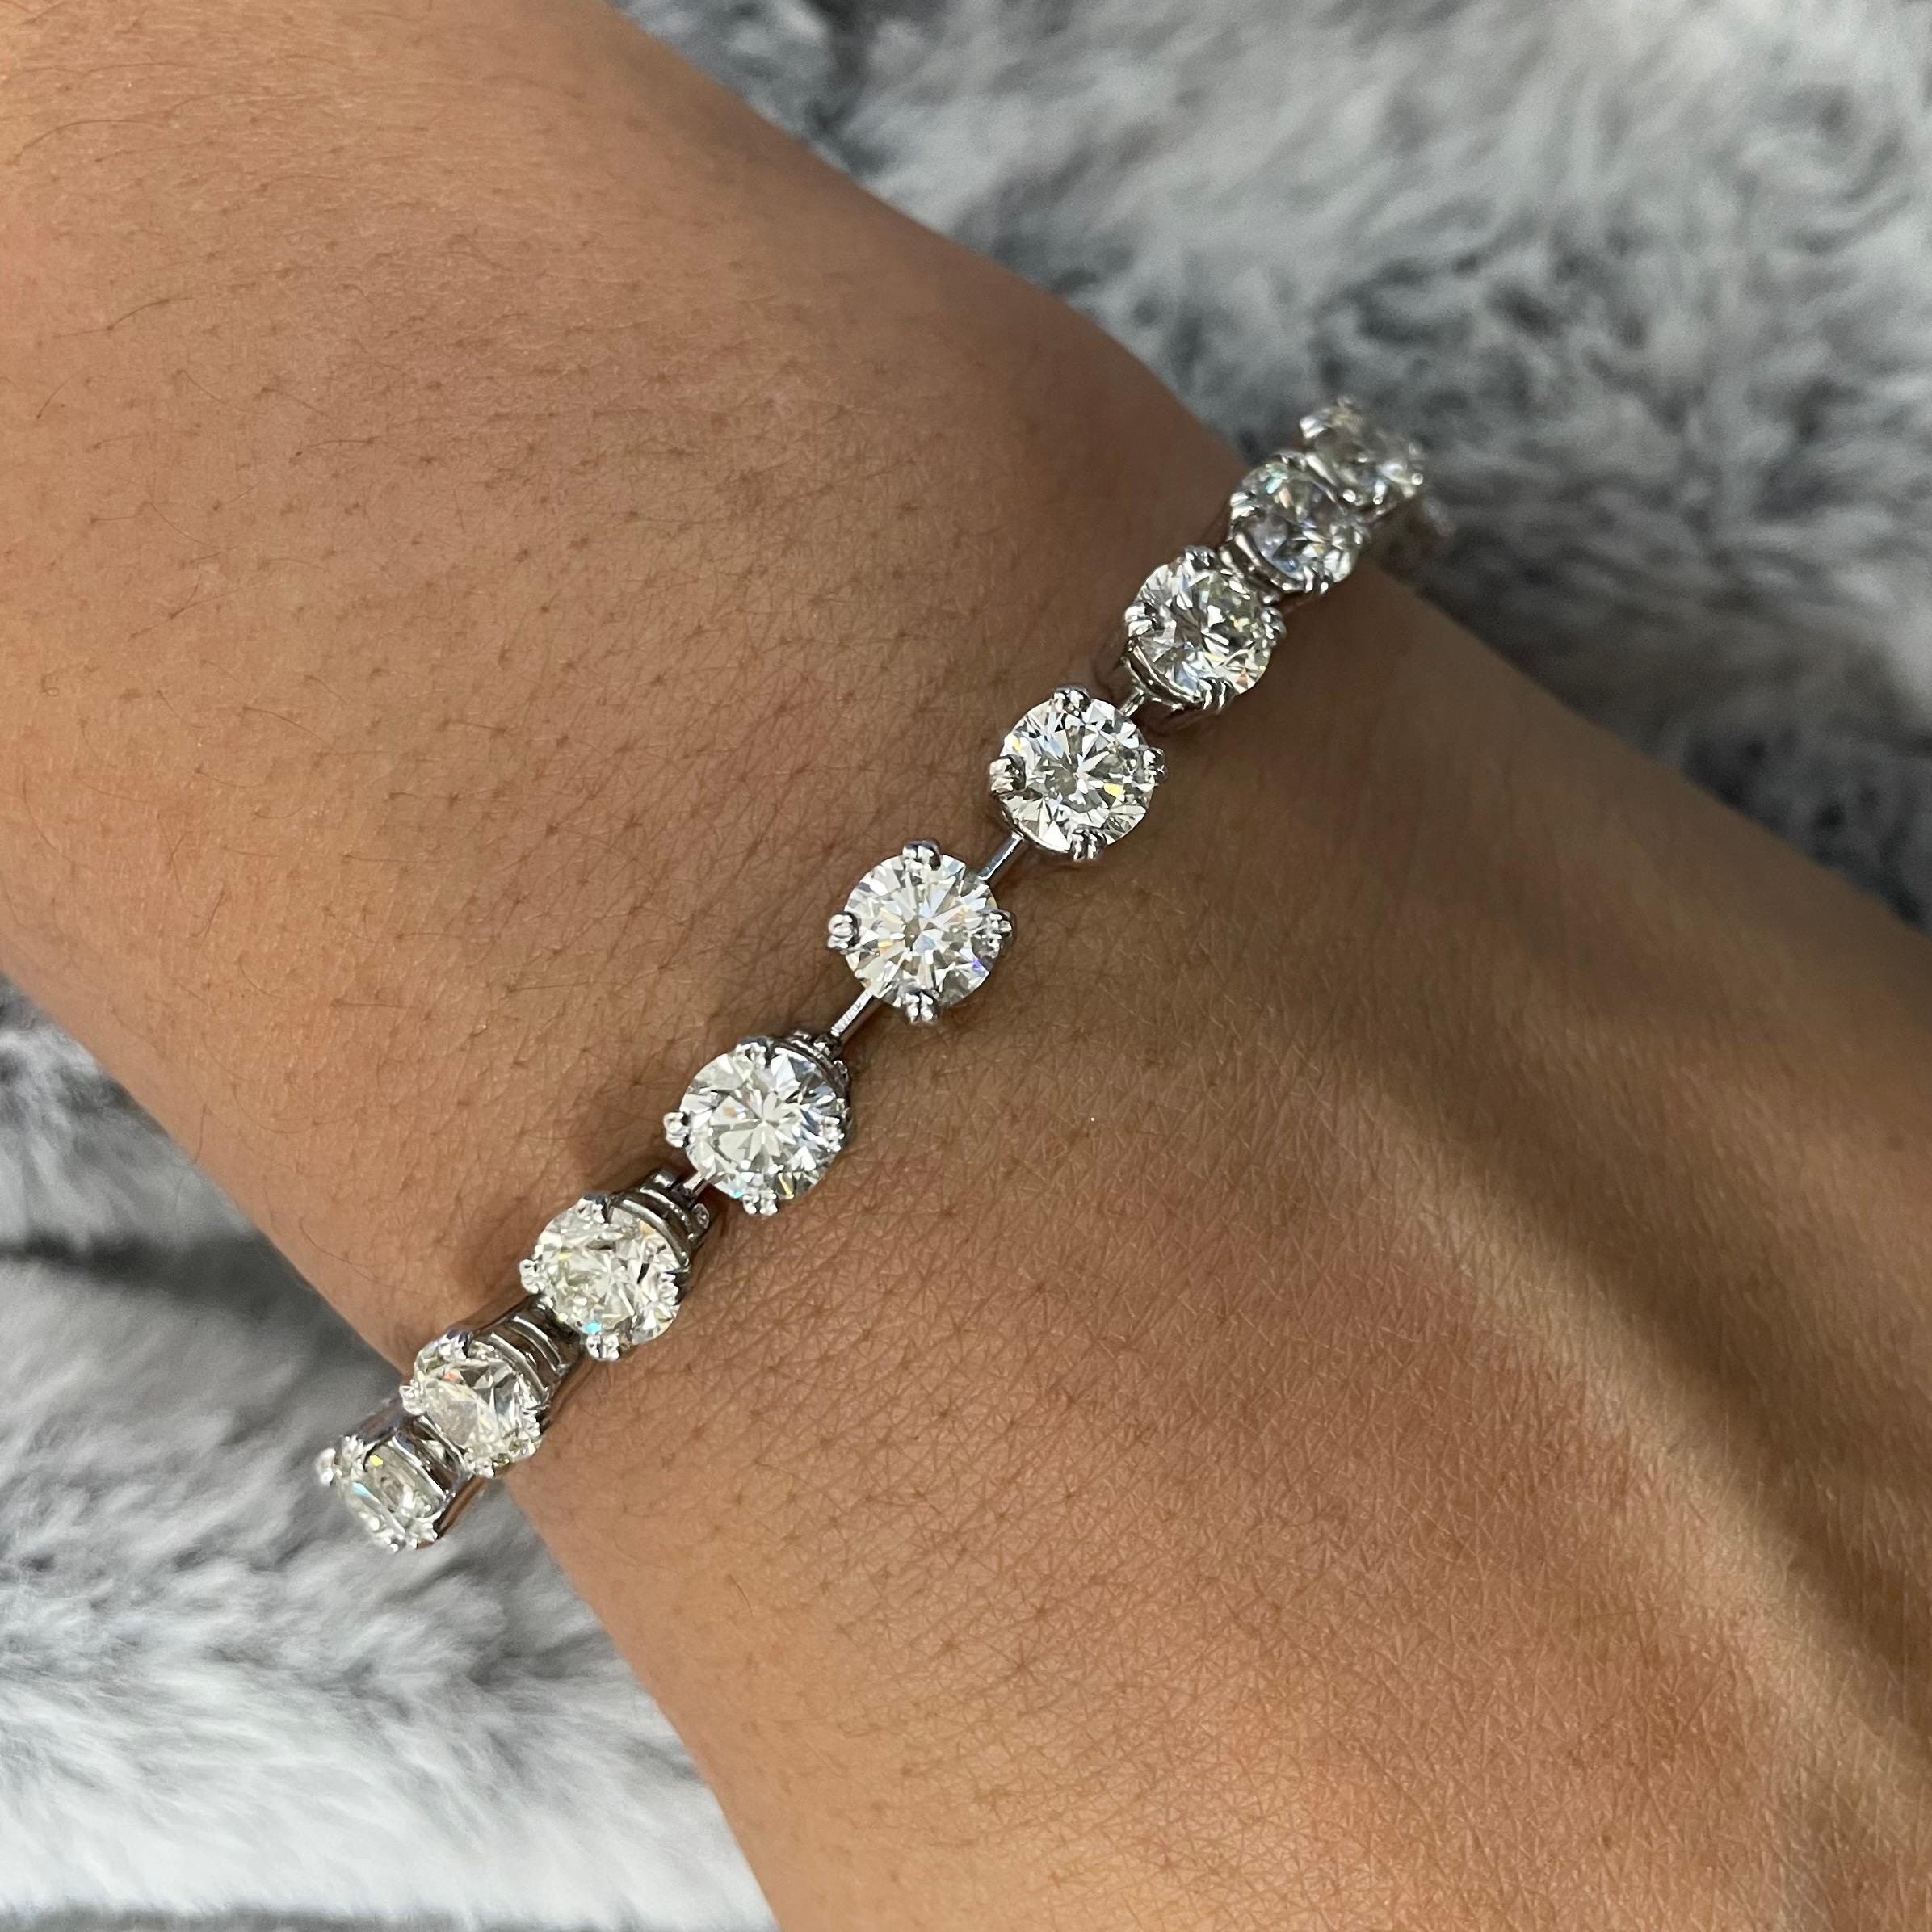 A diamond tennis bracelet is the most elegant and classic piece of evergreen jewelry. It is feminine, comfortable and accentuates a woman's wrist with brilliance and sparkles. All our bracelets have two locks for added security. 

Diamond Shapes: